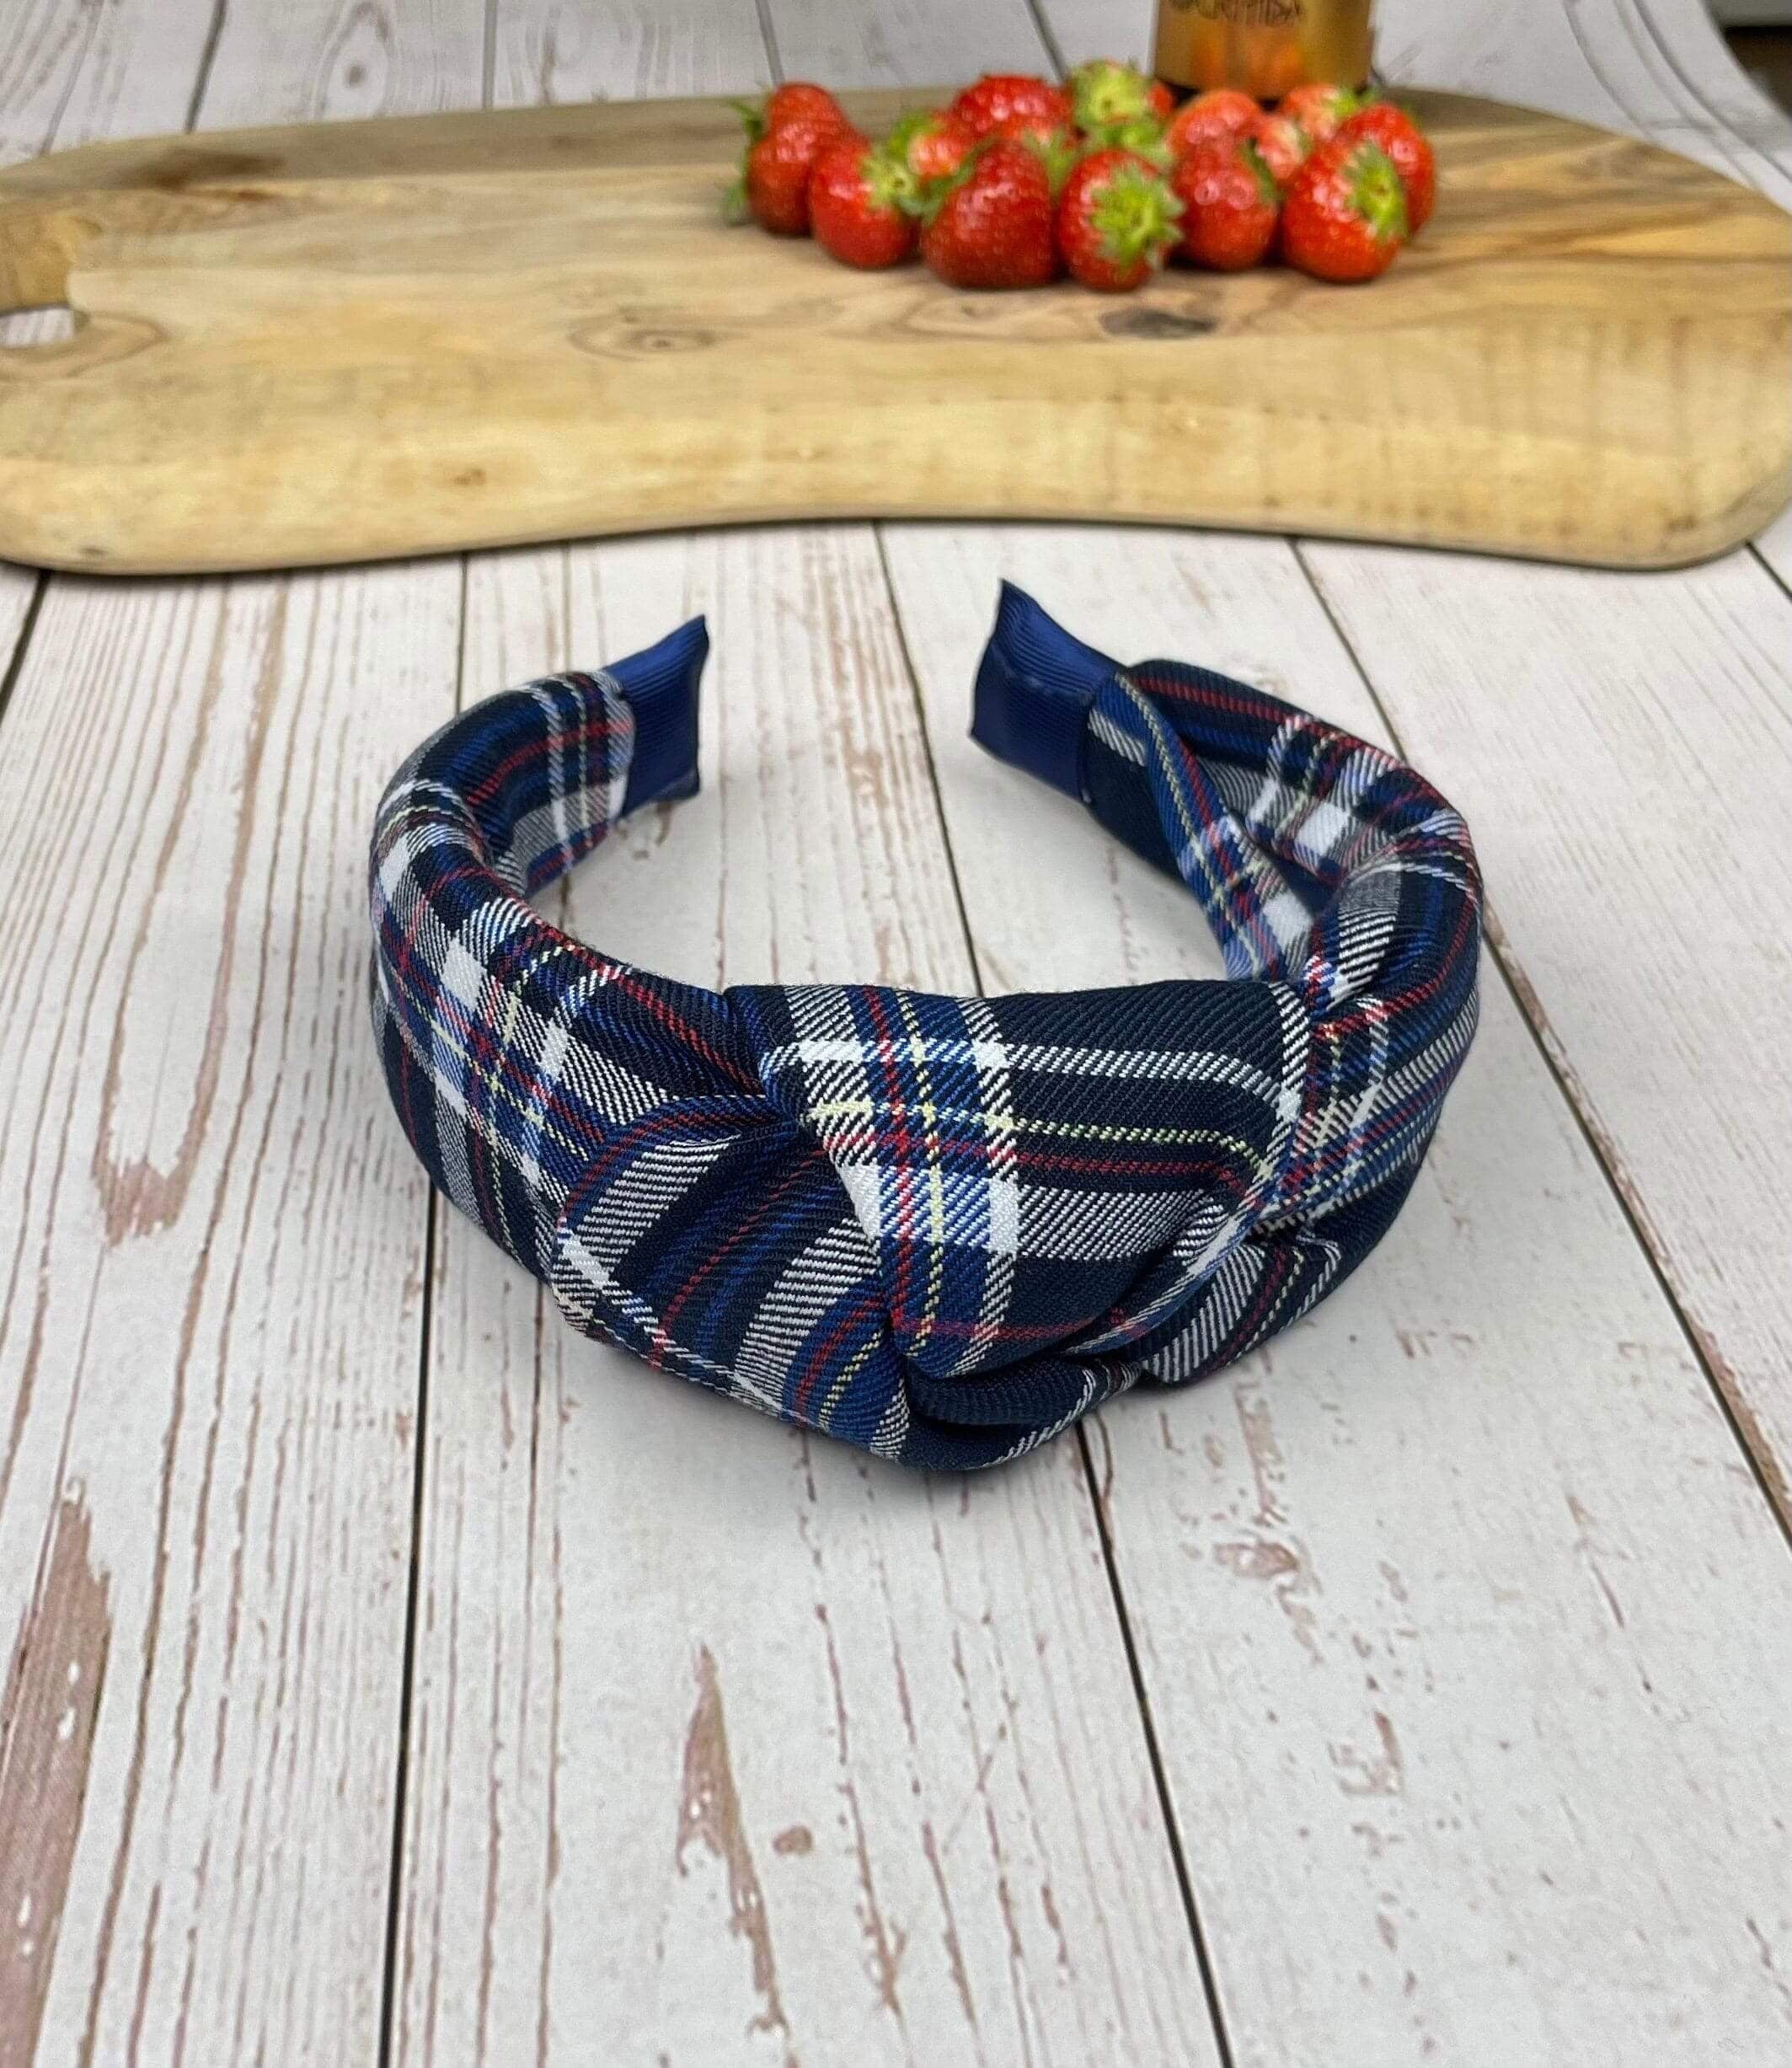 Stay trendy and comfortable with our Navy Blue and Pattern Wide Hairband. This headband is made from soft and stretchy material, perfect for all-day wear